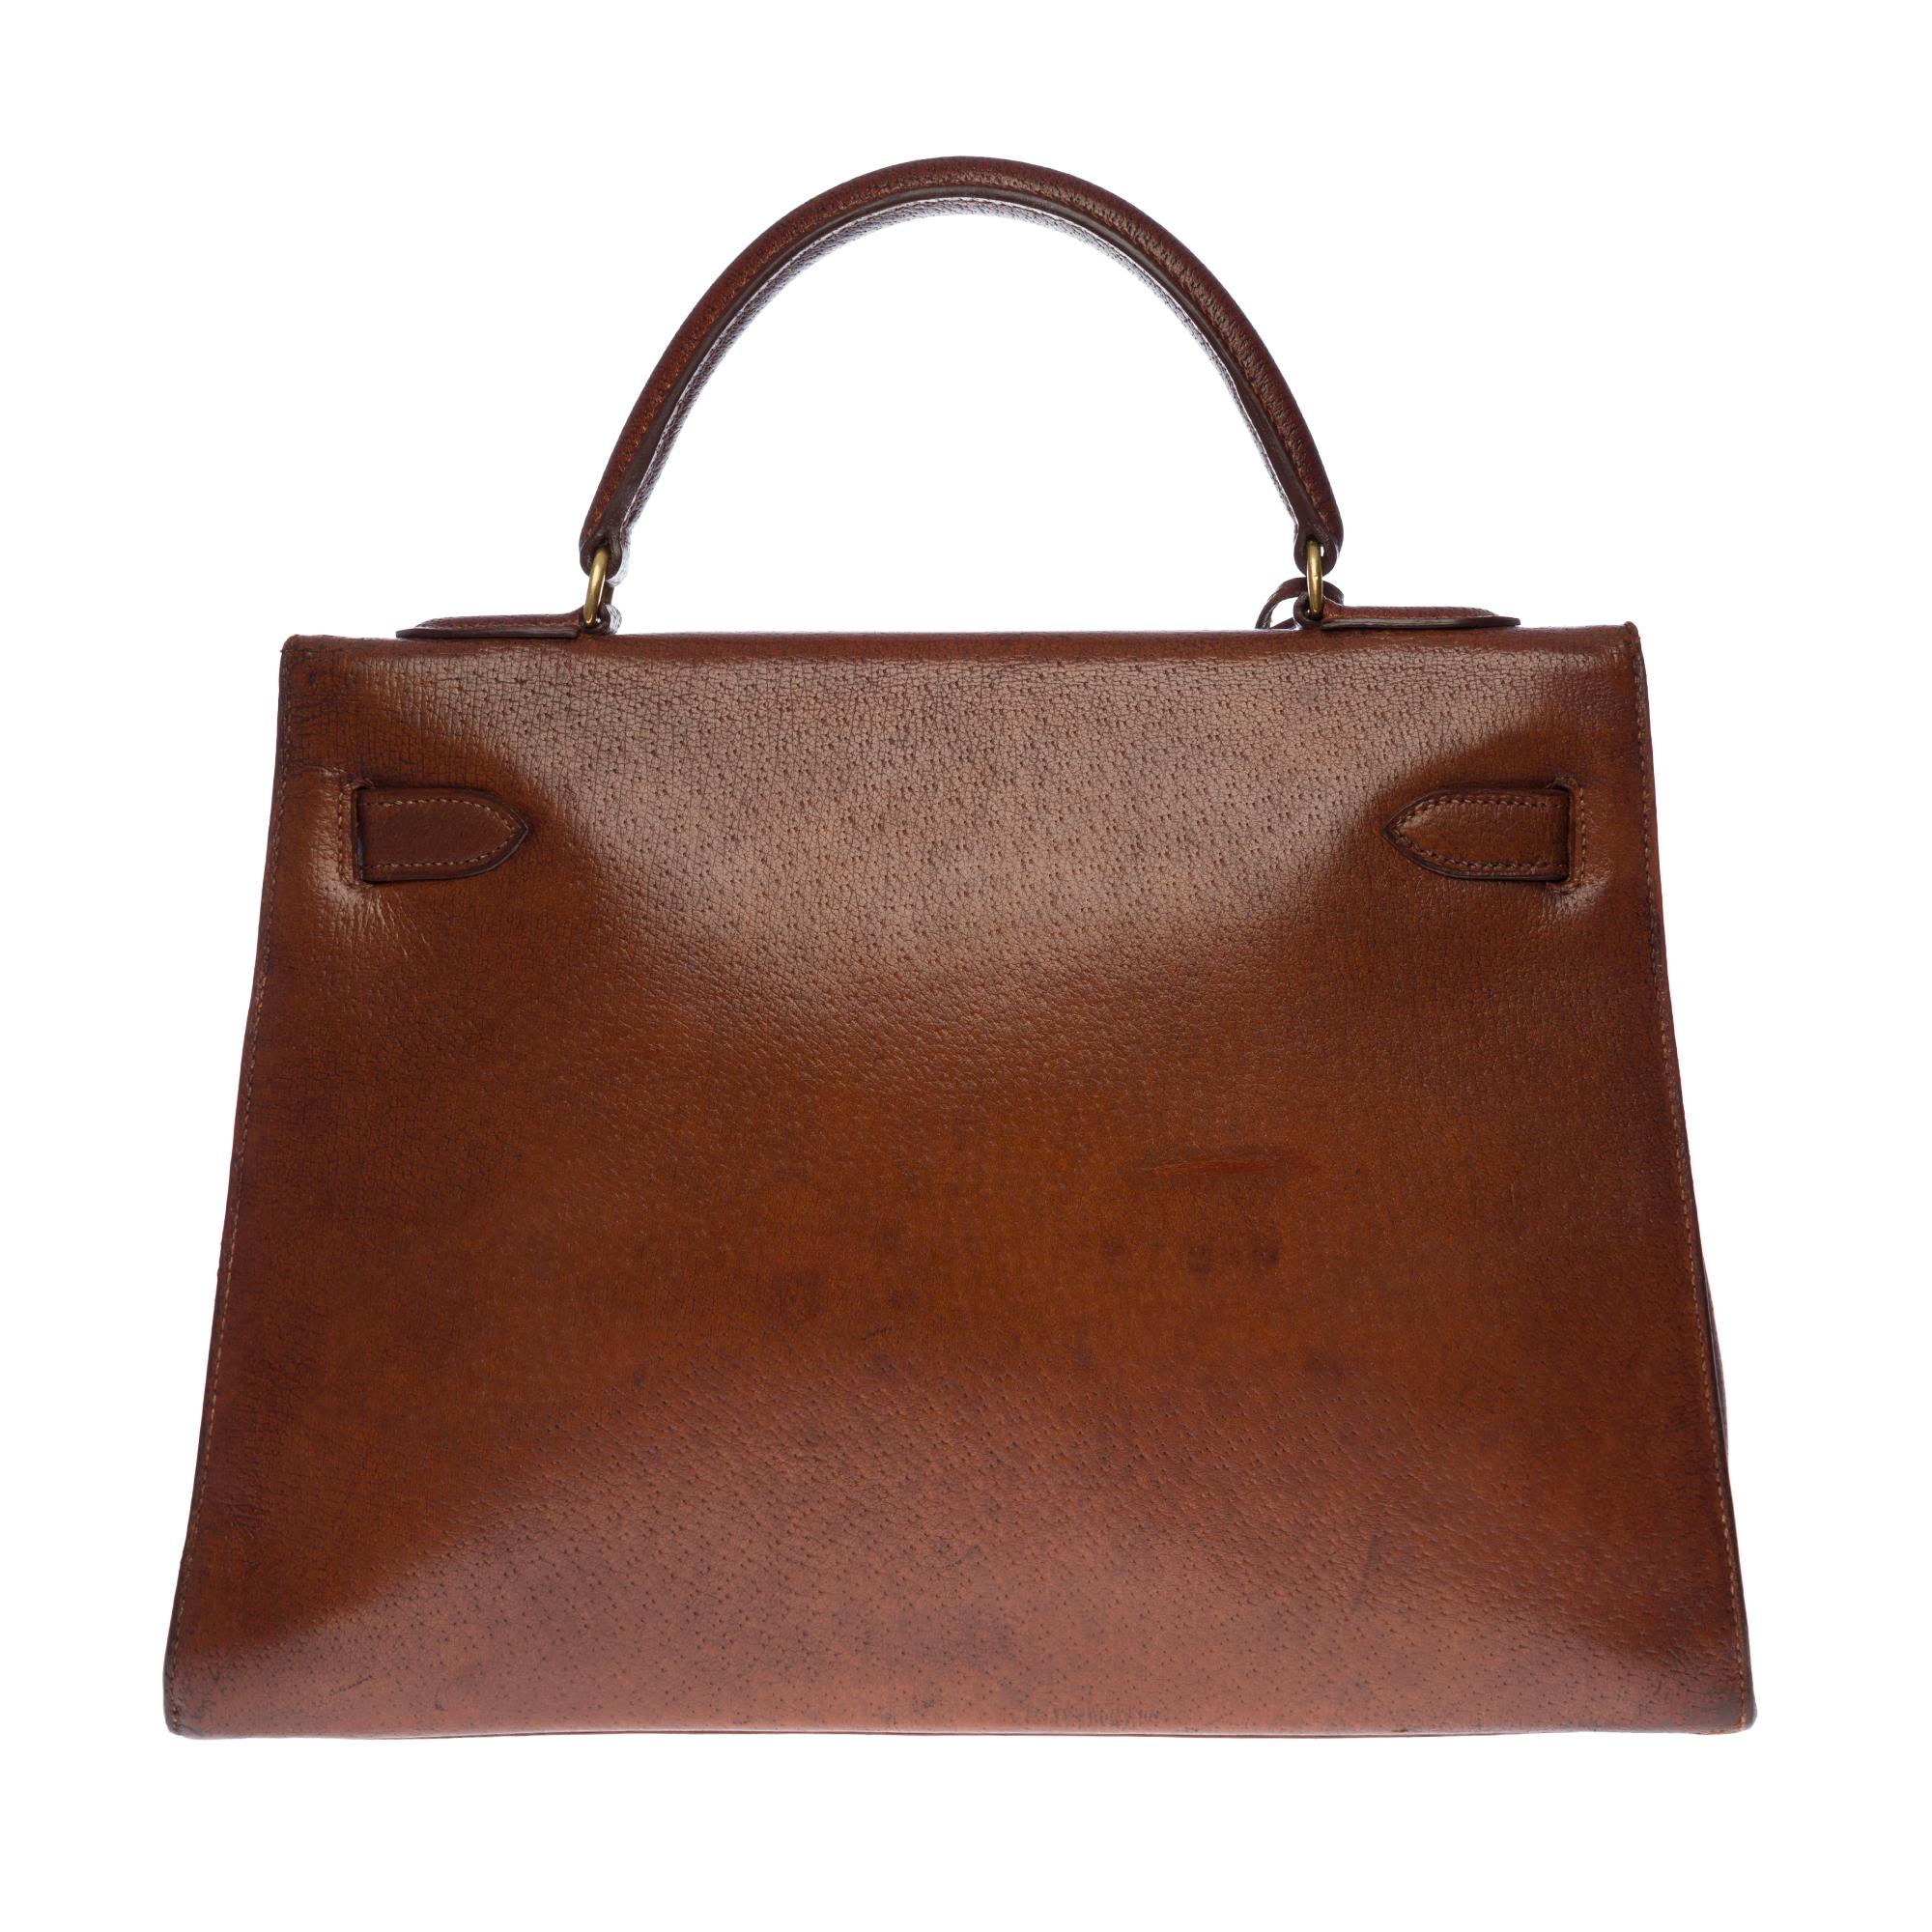 Superb and very Sought-after Hermes Kelly 32 sellierr bag in brown Pécari (Pork) leather, gold-plated metal hardware, removable shoulder strap in brown pecari leather (not signed Hermès), simple brown leather handle allowing a hand or shoulder